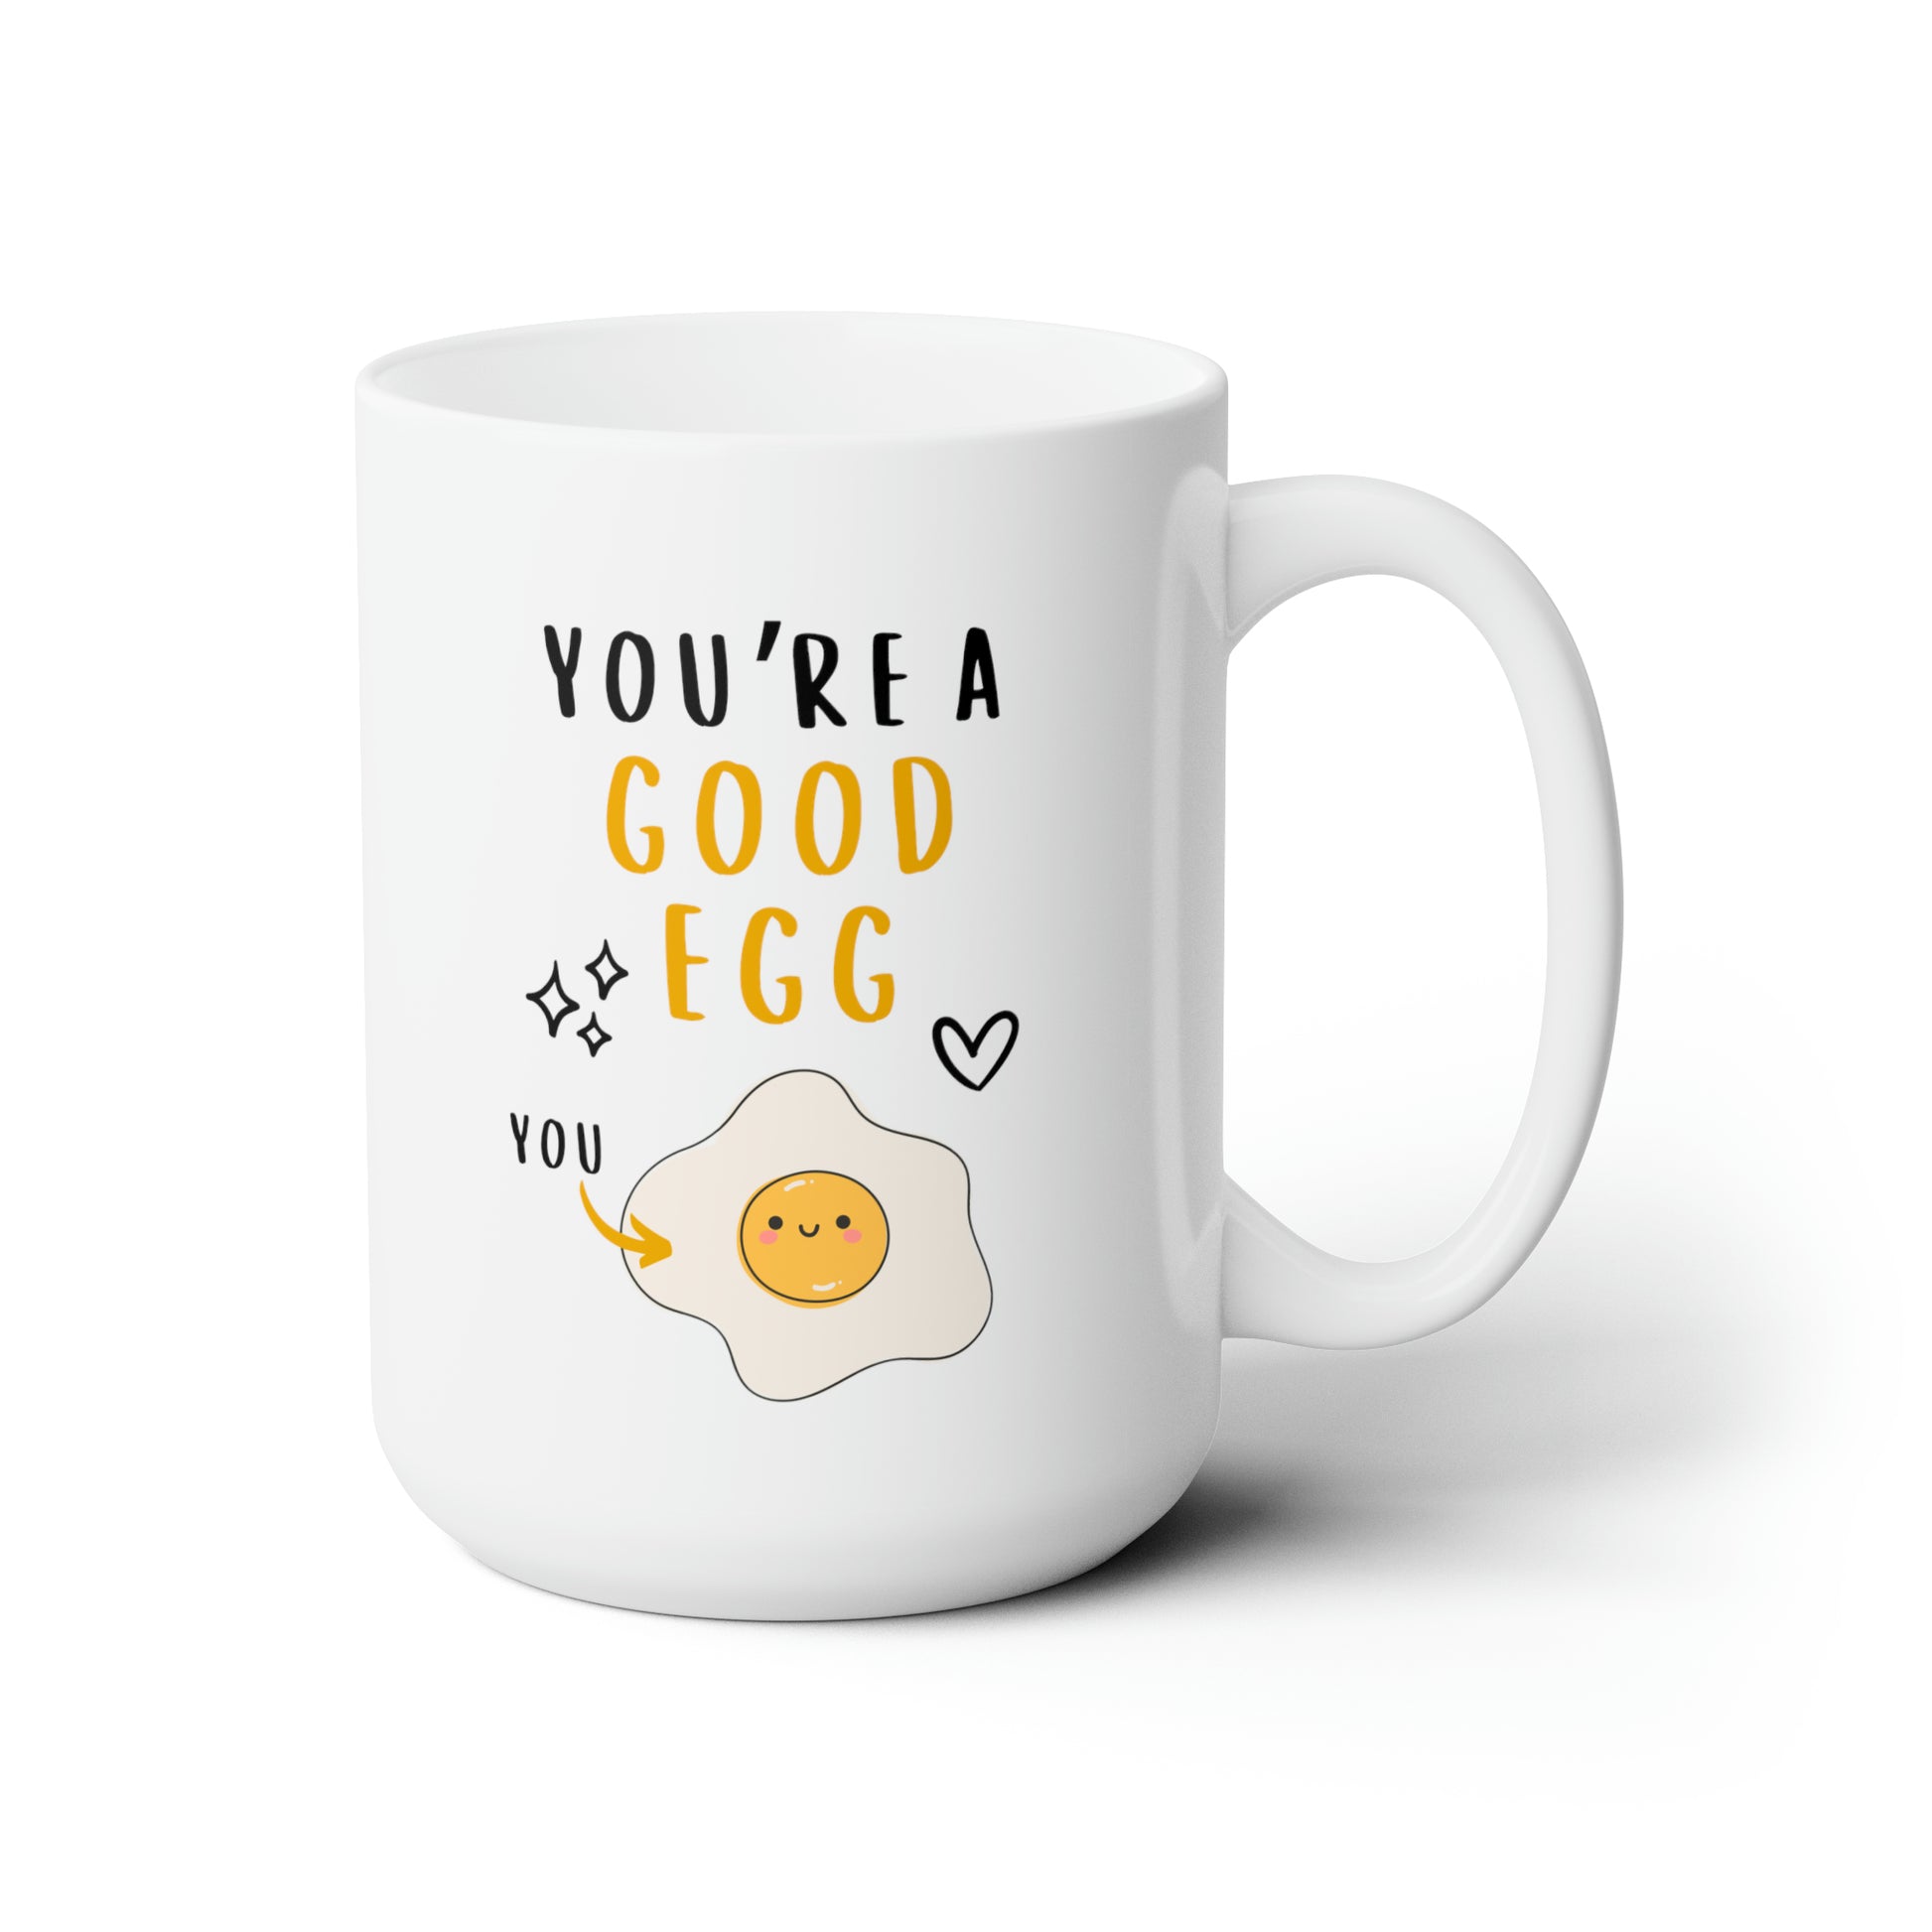 Youre a good egg 15oz white funny large big coffee mug tea cup gift for bff friend mothers day gift waveywares wavey wares wavywares wavy wares